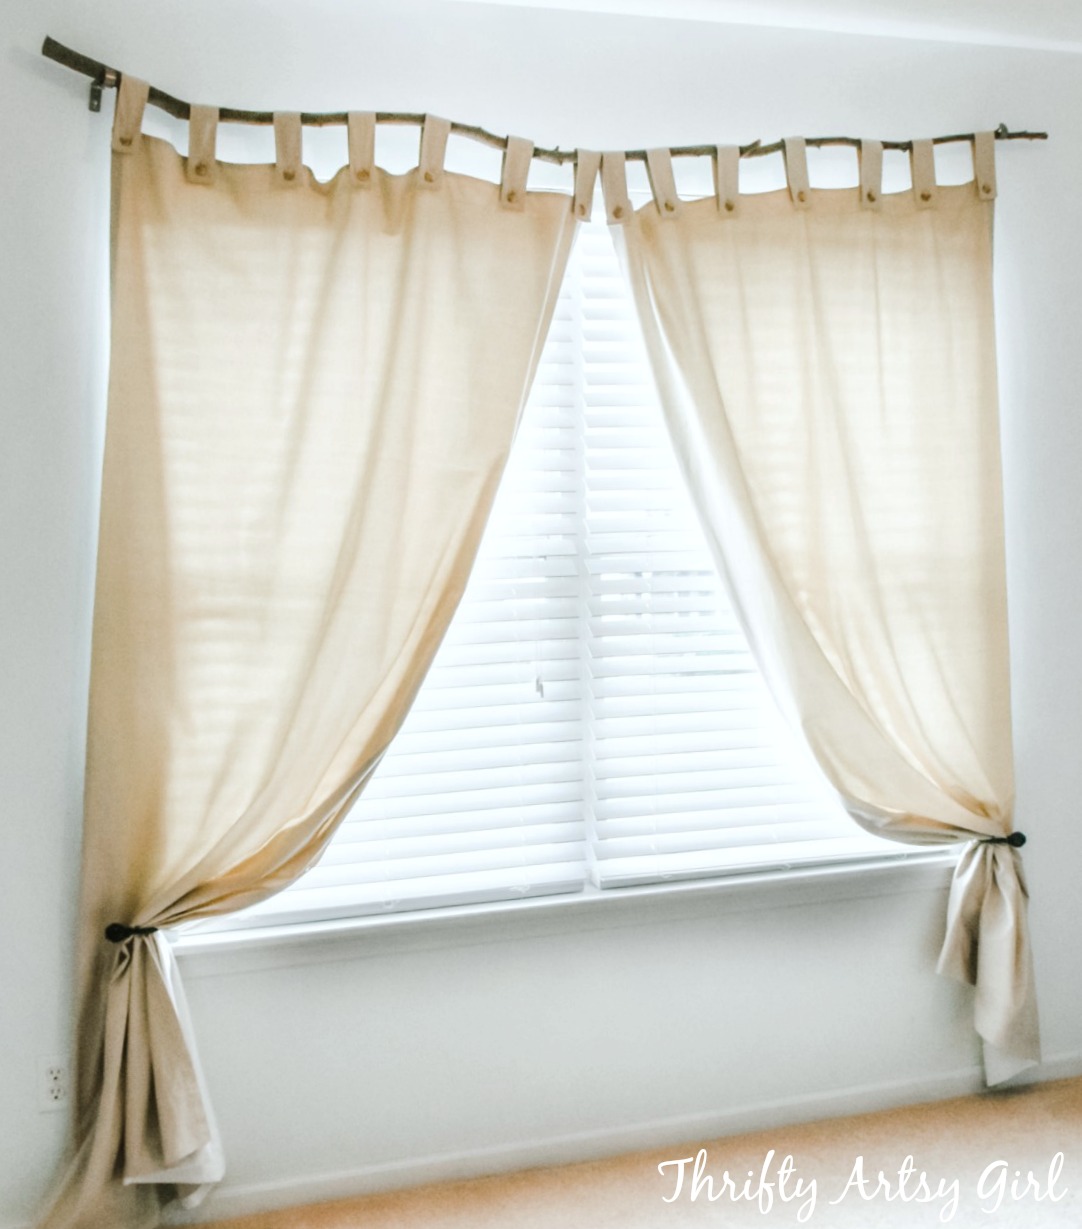 Thrifty Artsy Girl: Easy (and Free!) Rustic Tree Branch Curtain